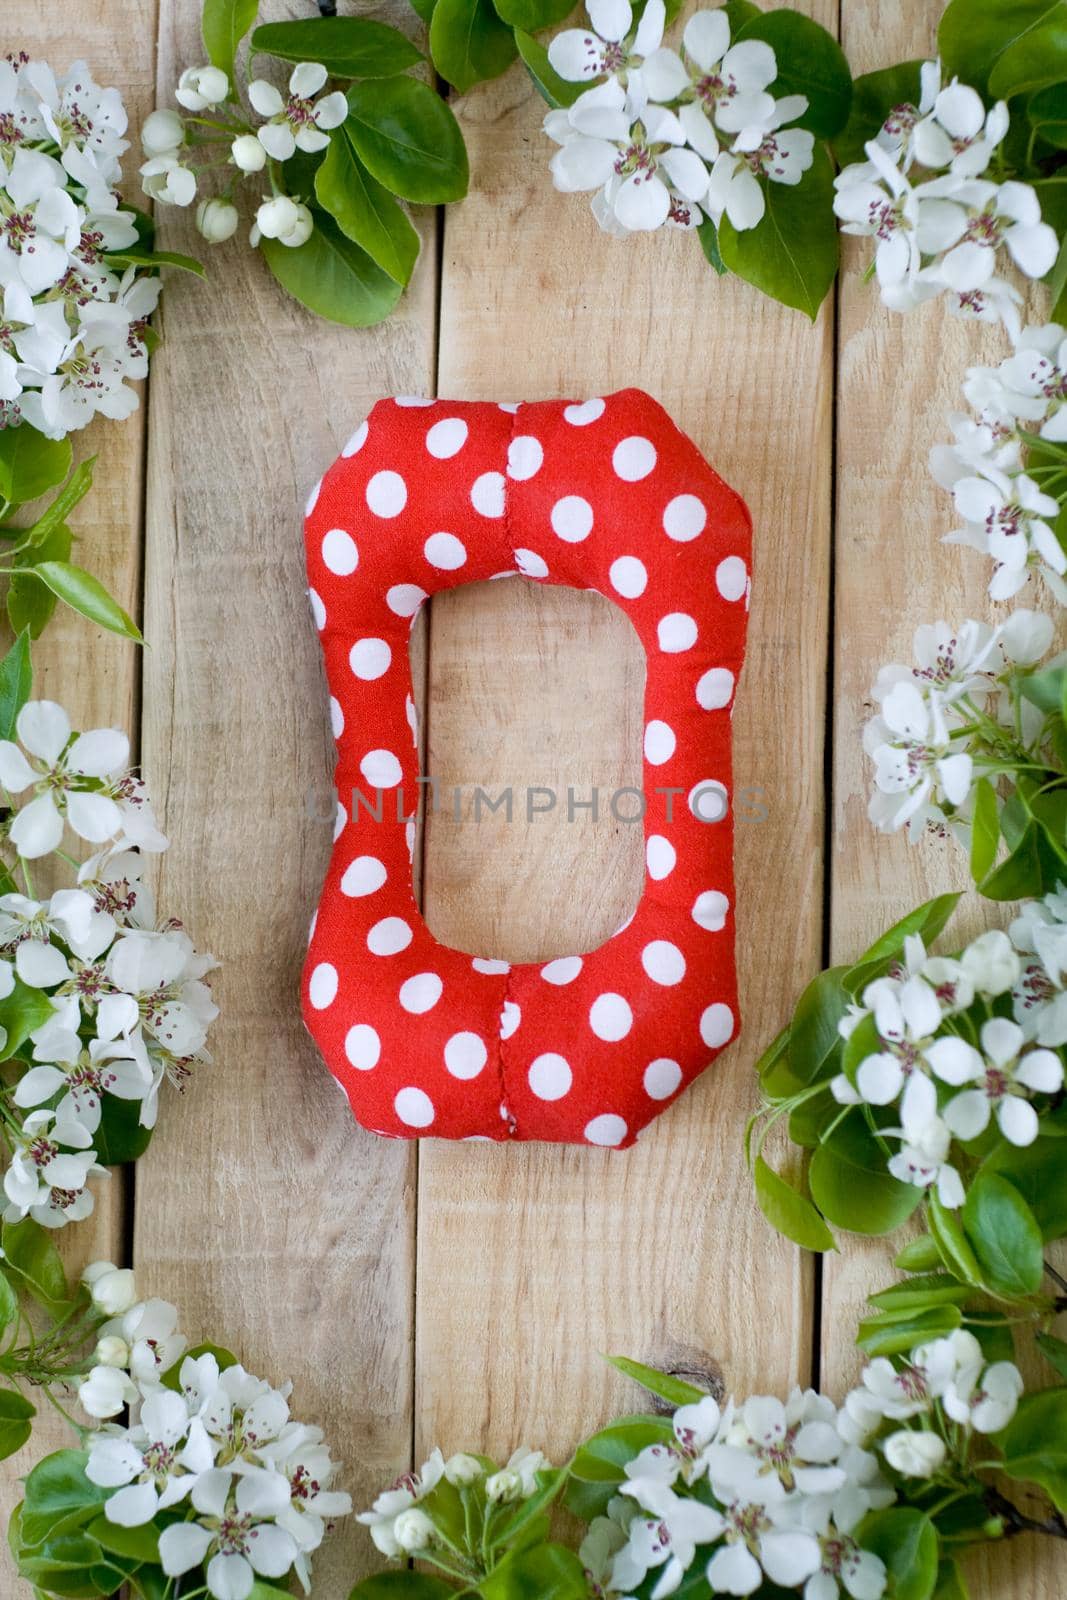 Natural wooden background with white flowers fruit tree. In the middle is the letter О, is made of red polka dot fabric. by Myrka